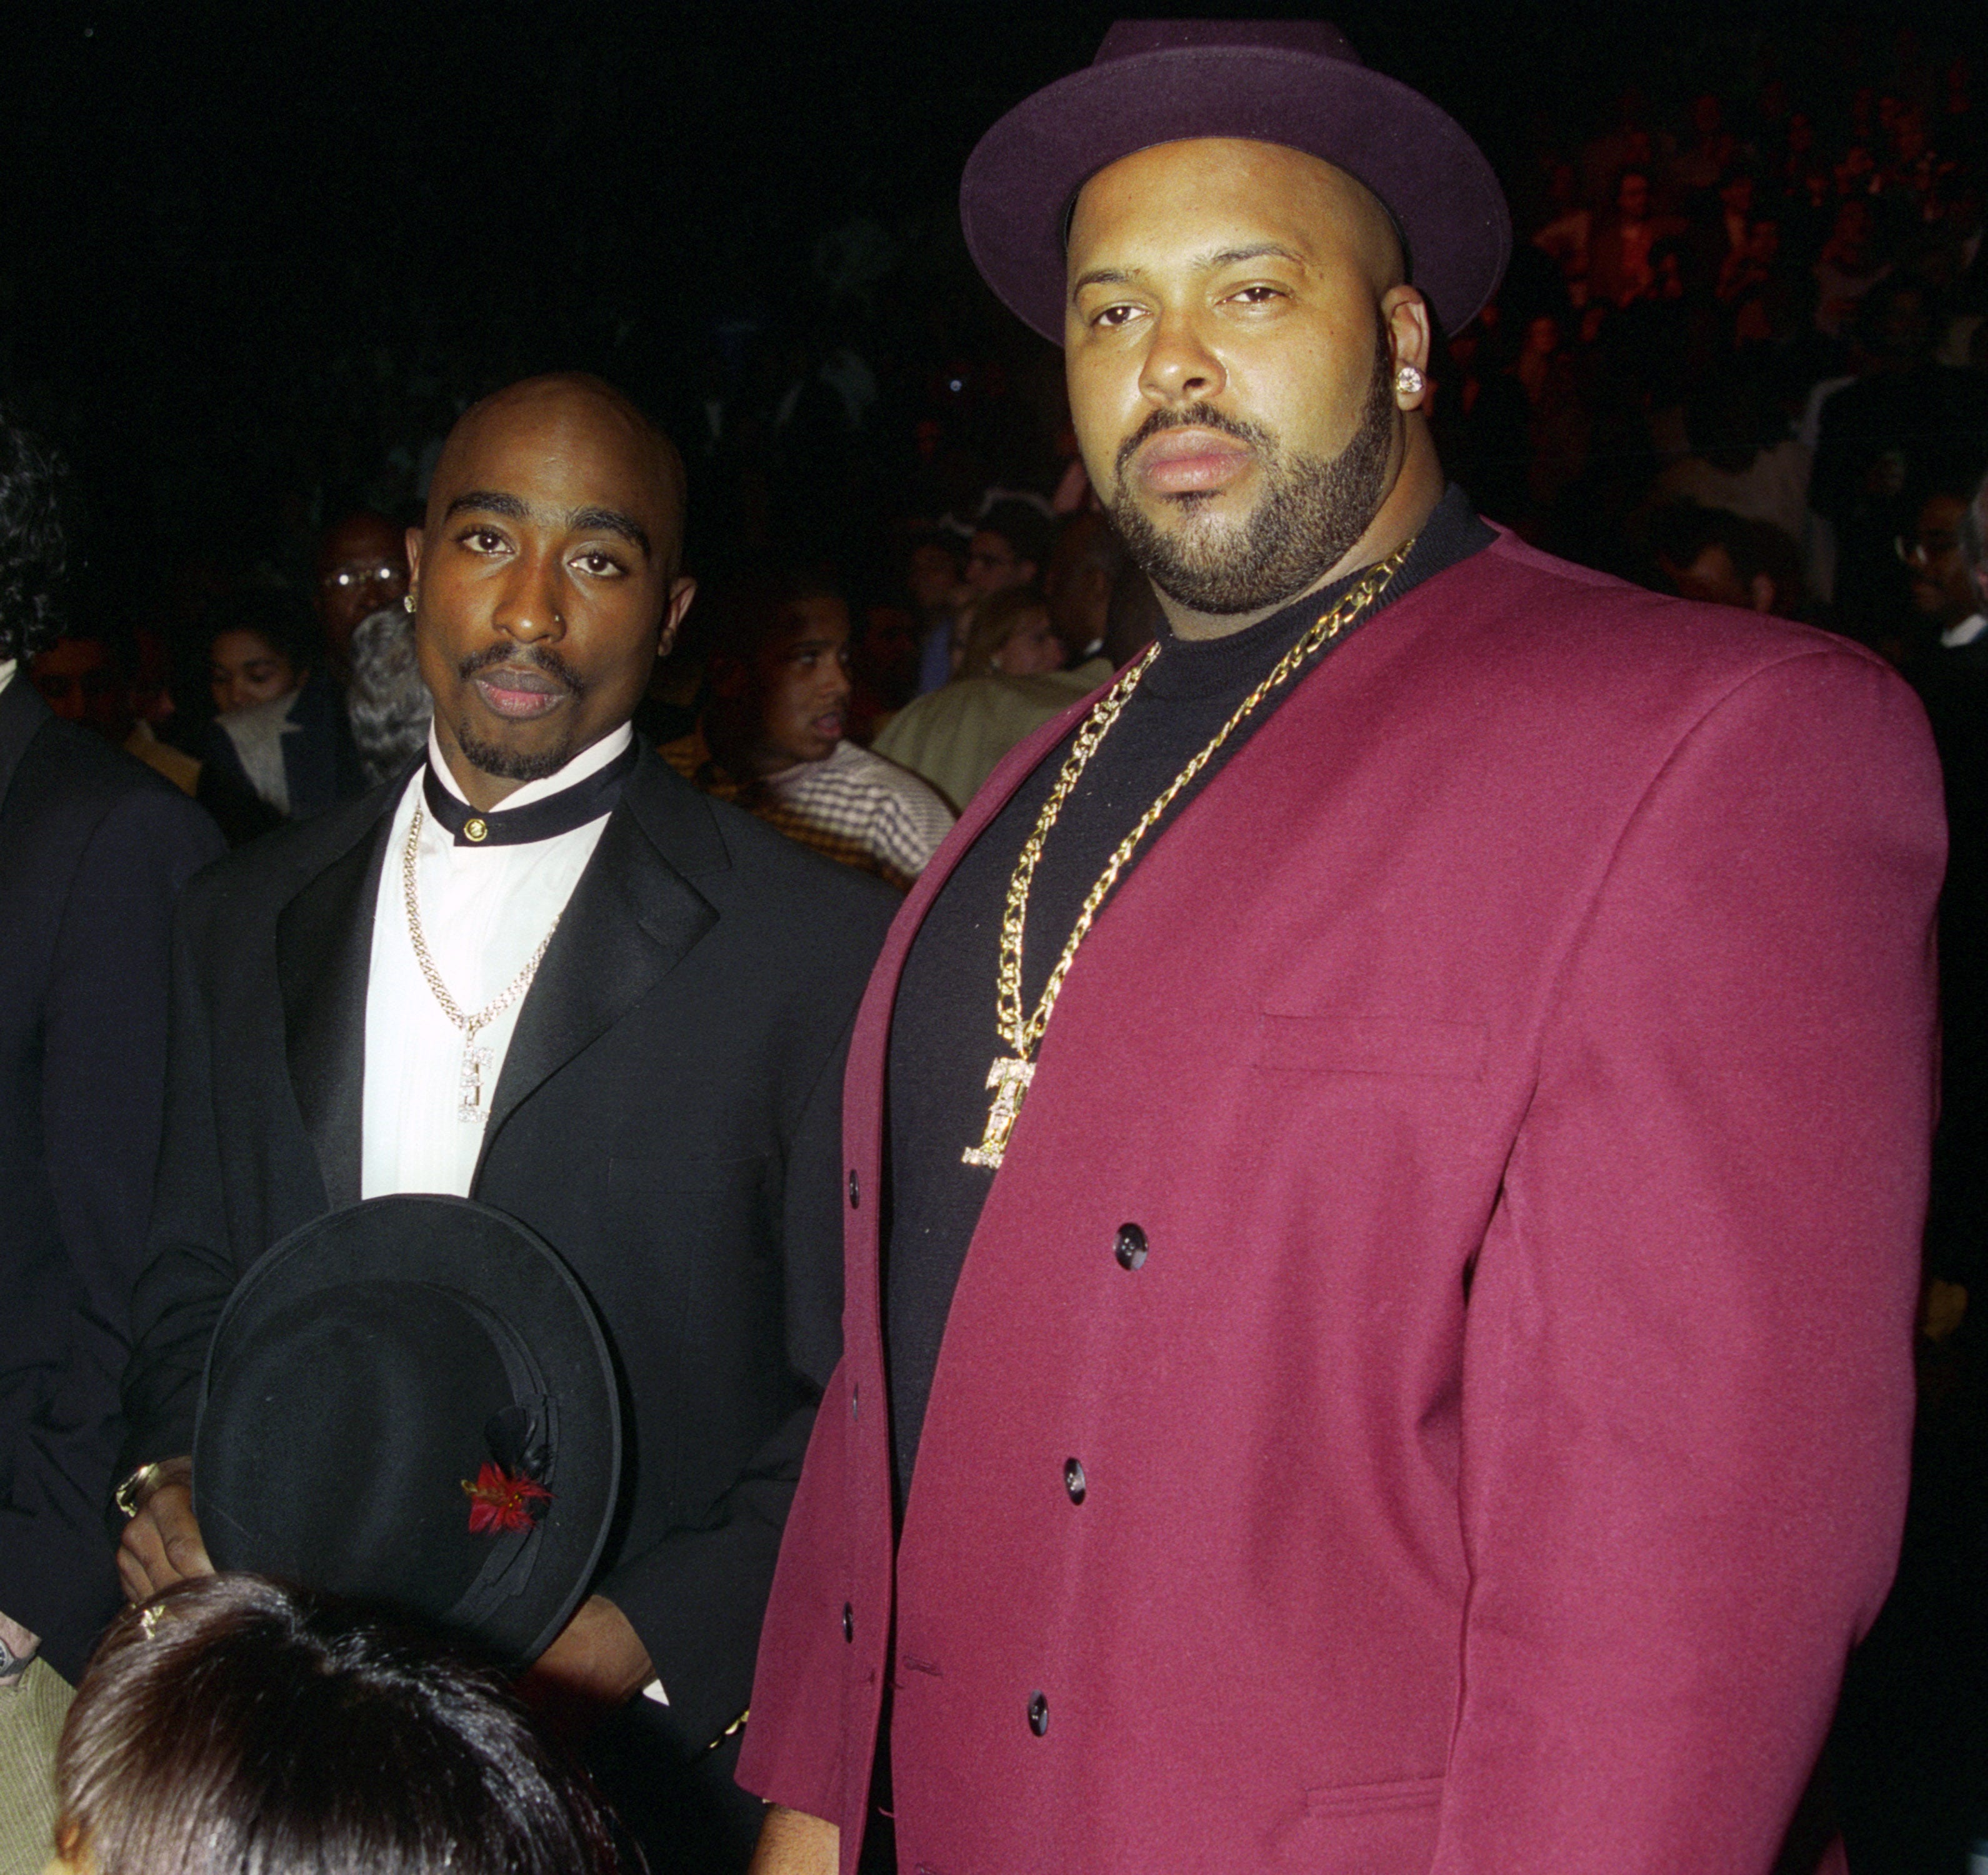 Tupac and Suge Knight in Las Vegas